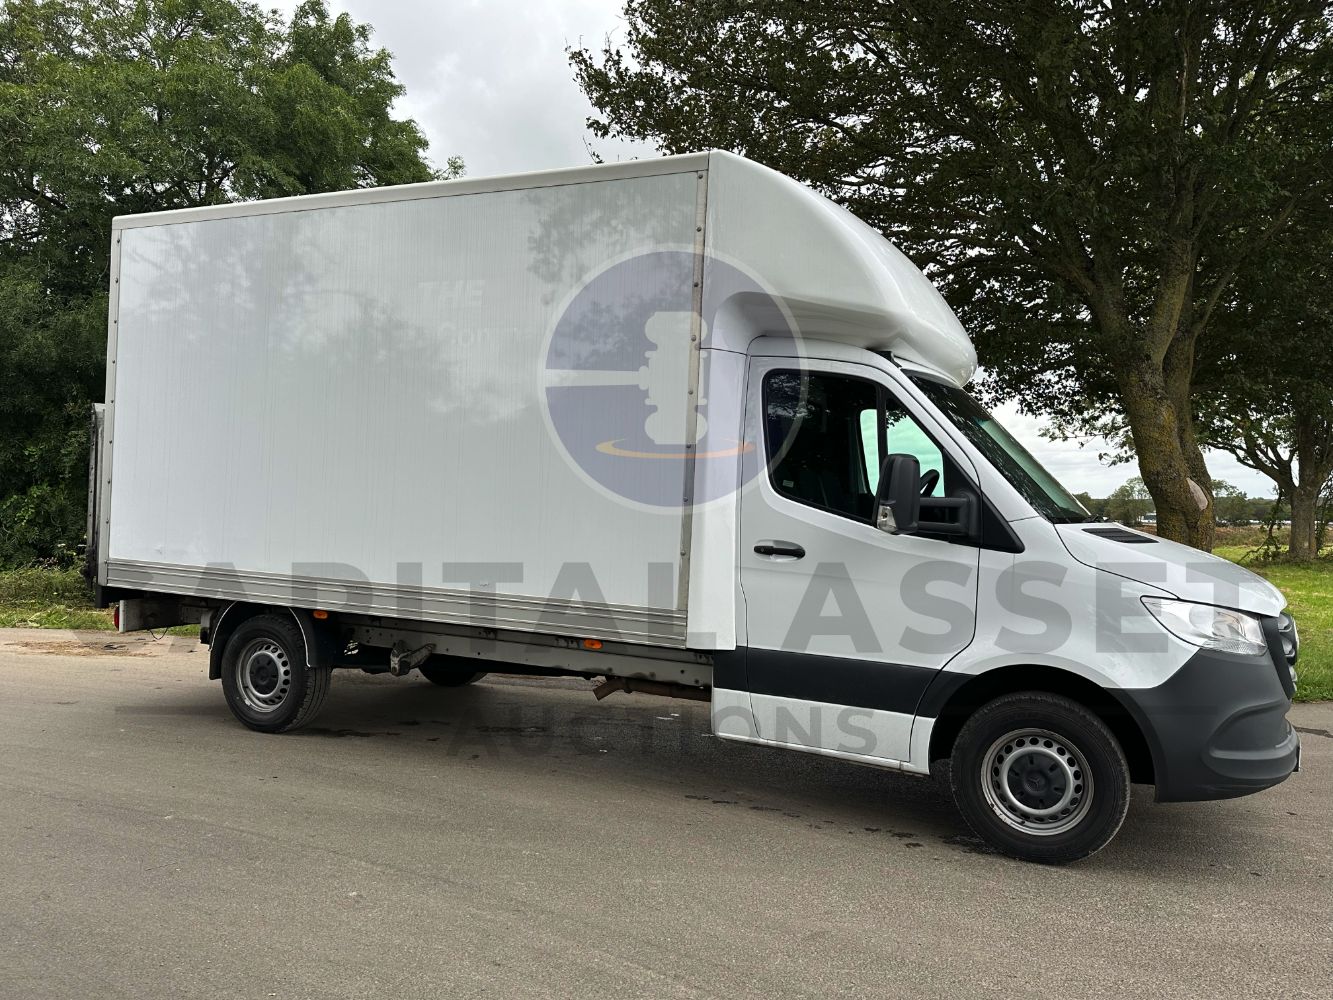 2021 Mercedes-Benz Sprinter 314 Cdi *Luton / Box Van* - Land Rover Discovery Sport *HSE 7 Seater* + Many More: Cars, Commercials & 4x4's !!!